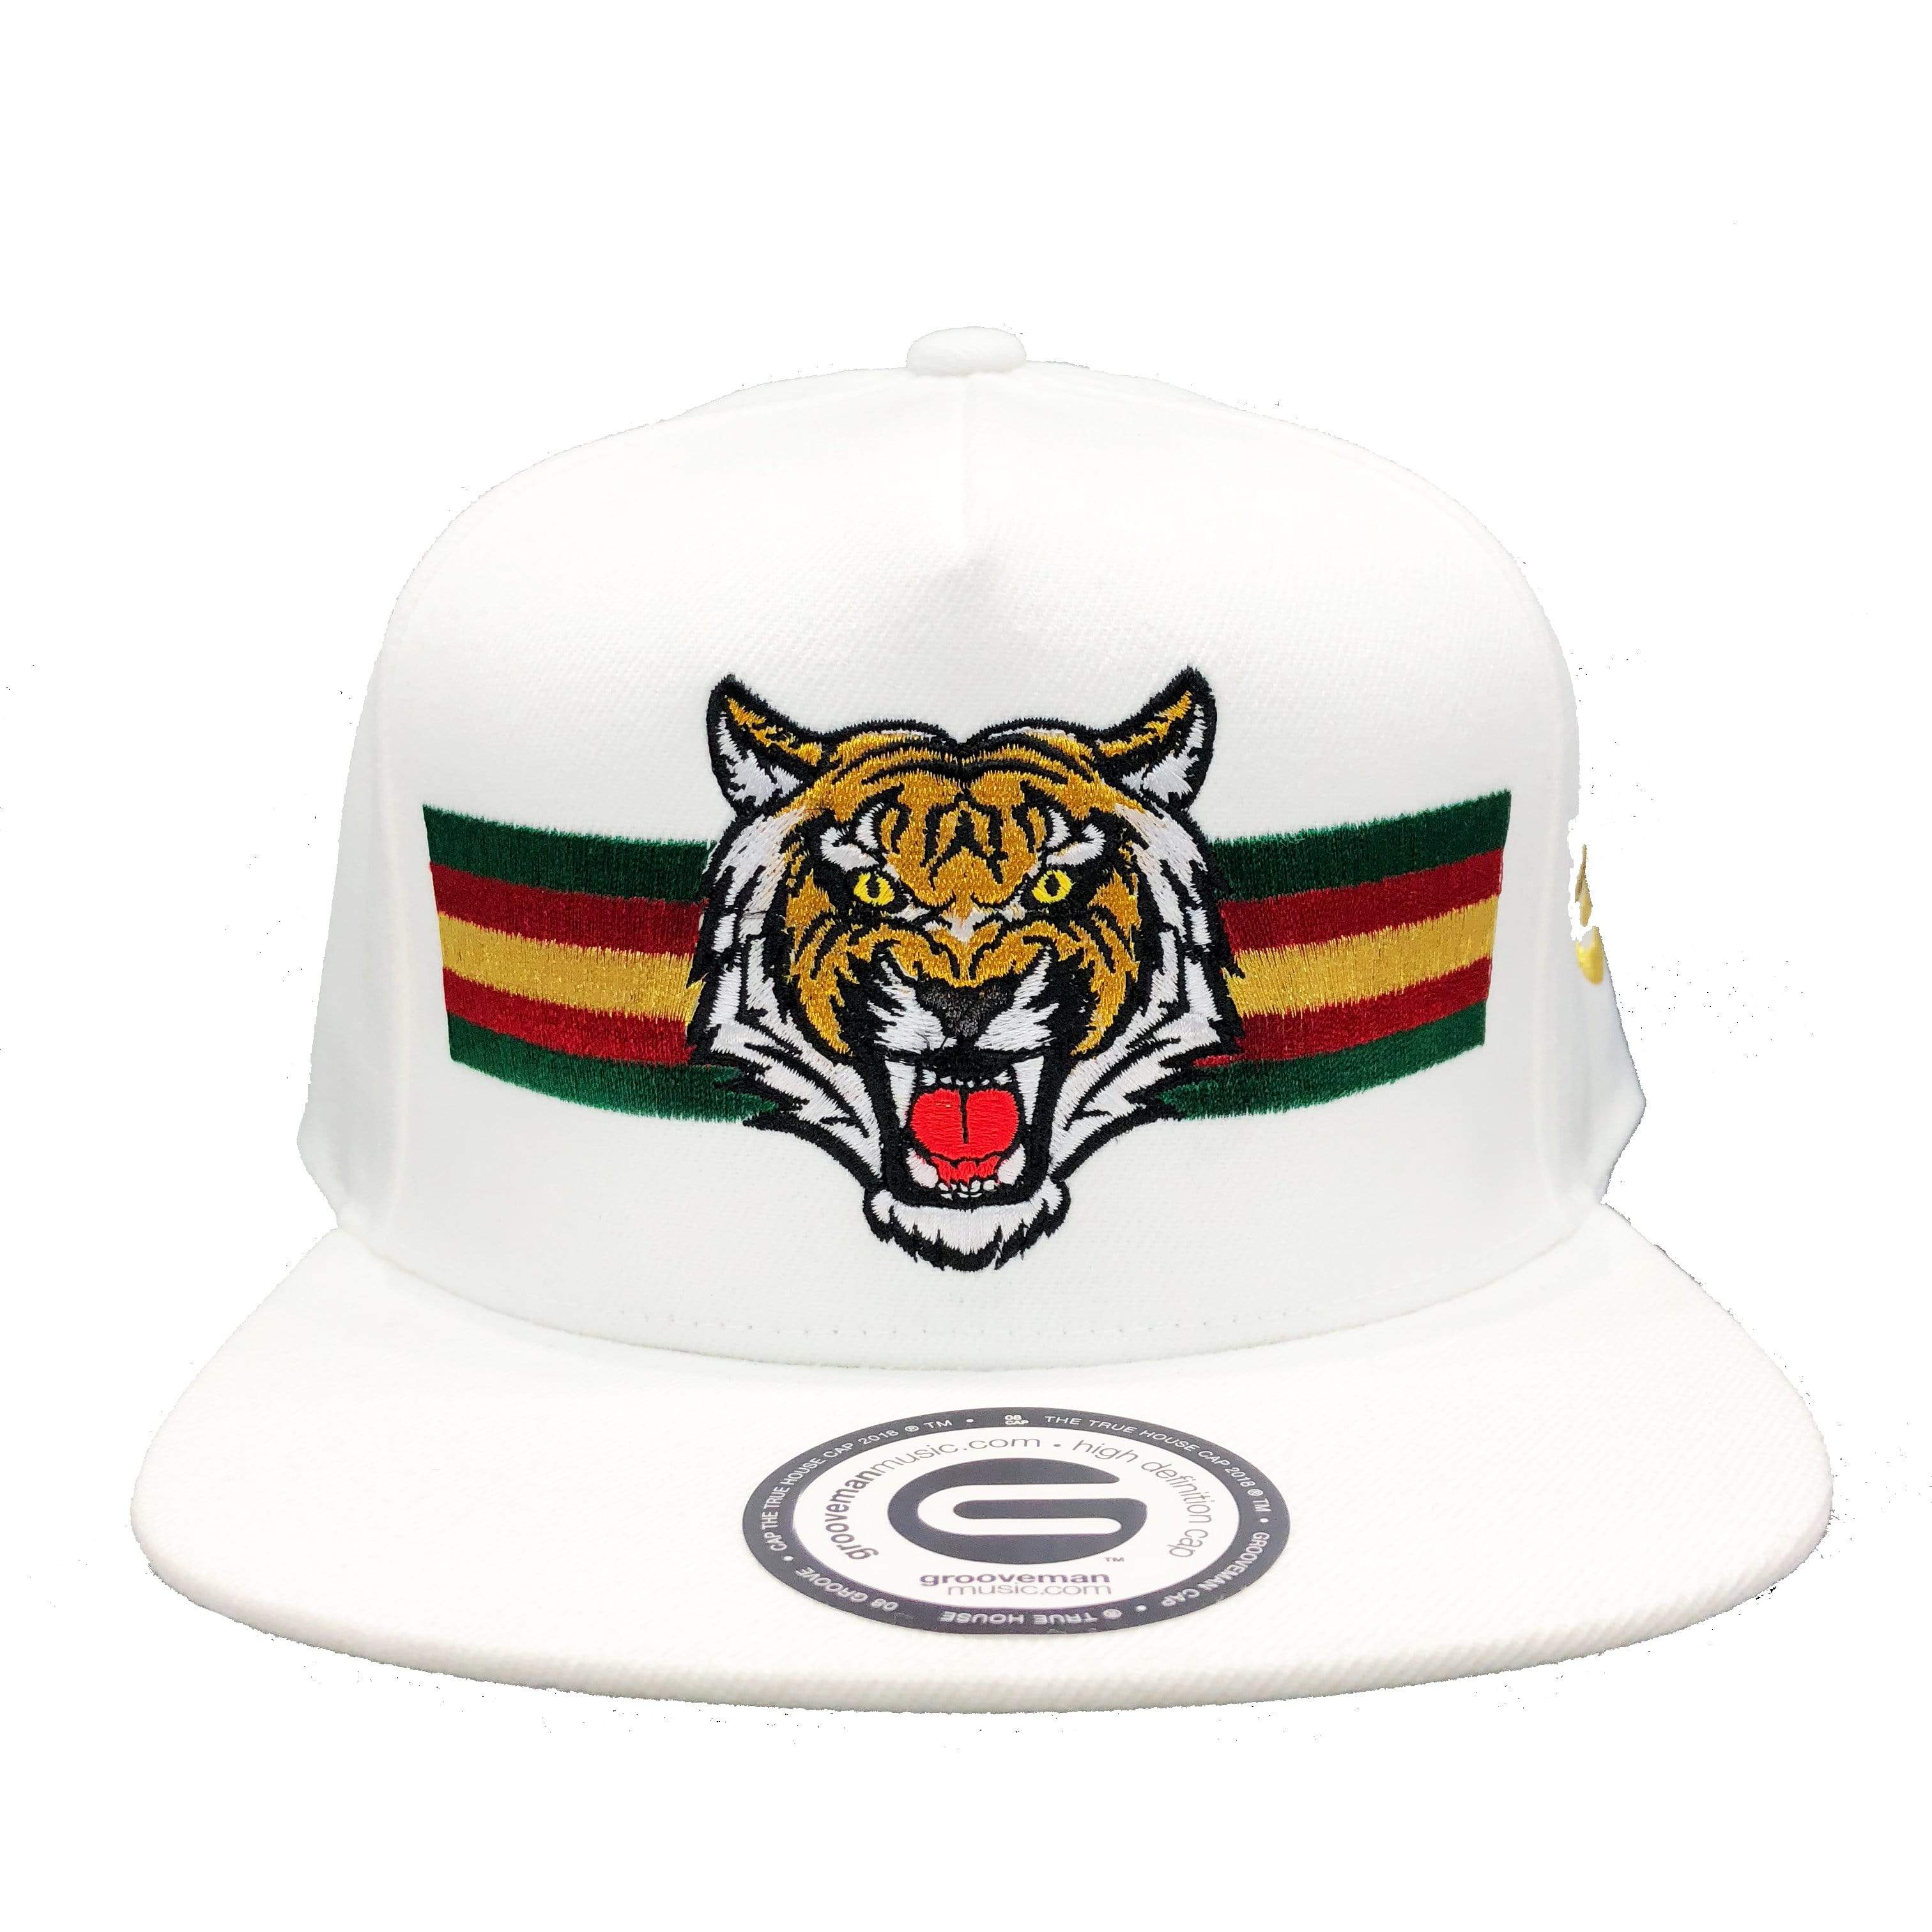 Grooveman Music Hats One Size / White Tiger Snapback